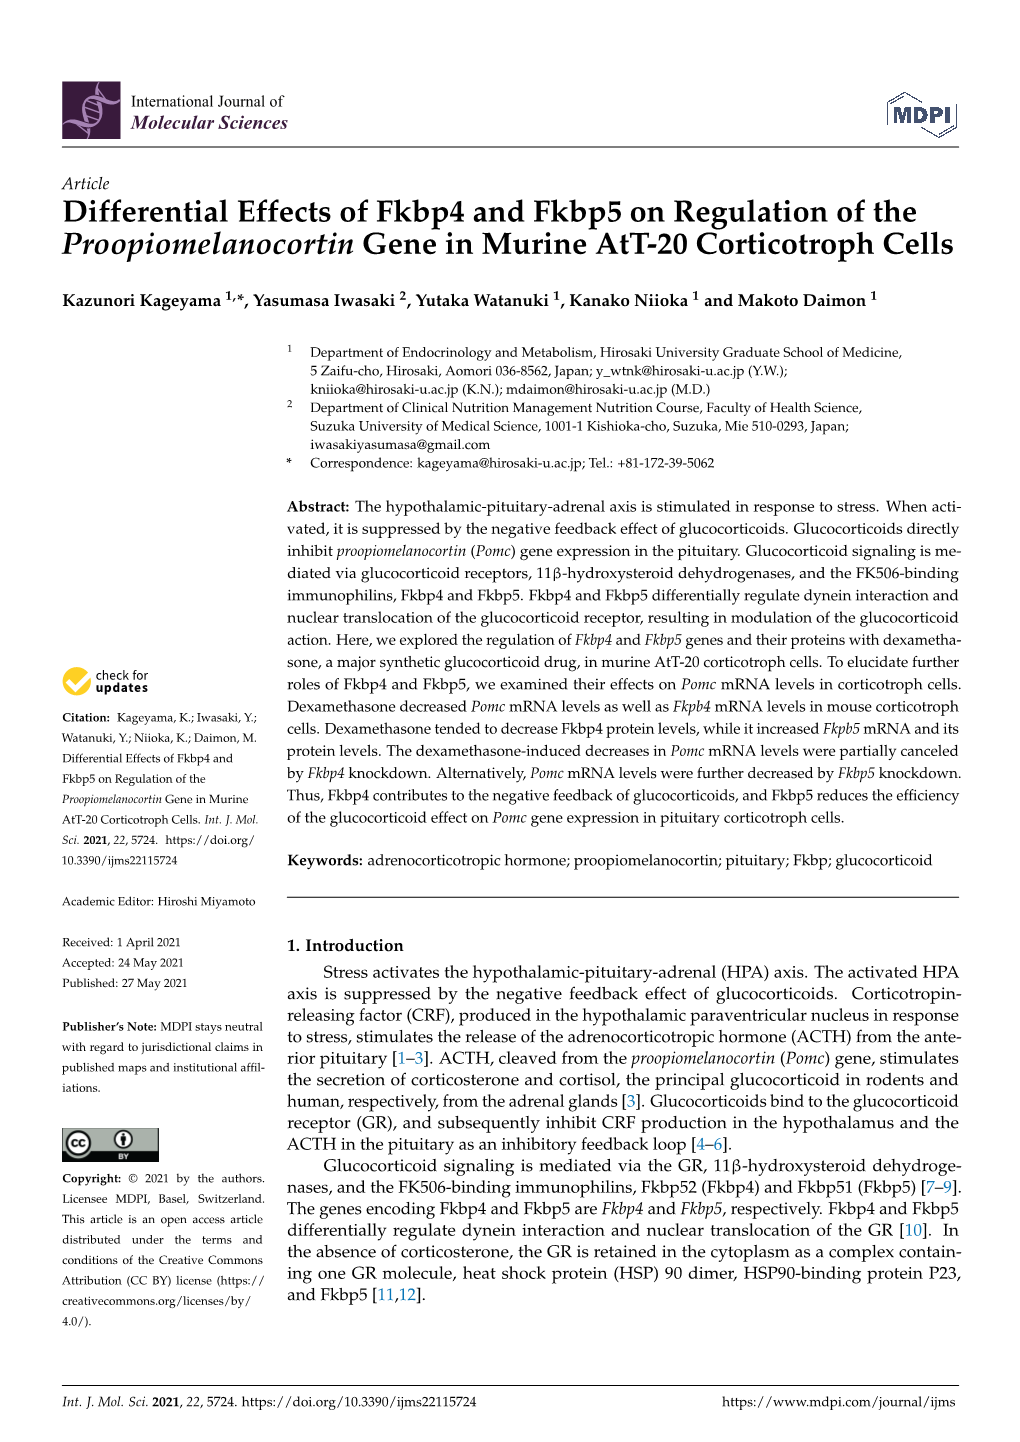 Differential Effects of Fkbp4 and Fkbp5 on Regulation of the Proopiomelanocortin Gene in Murine Att-20 Corticotroph Cells